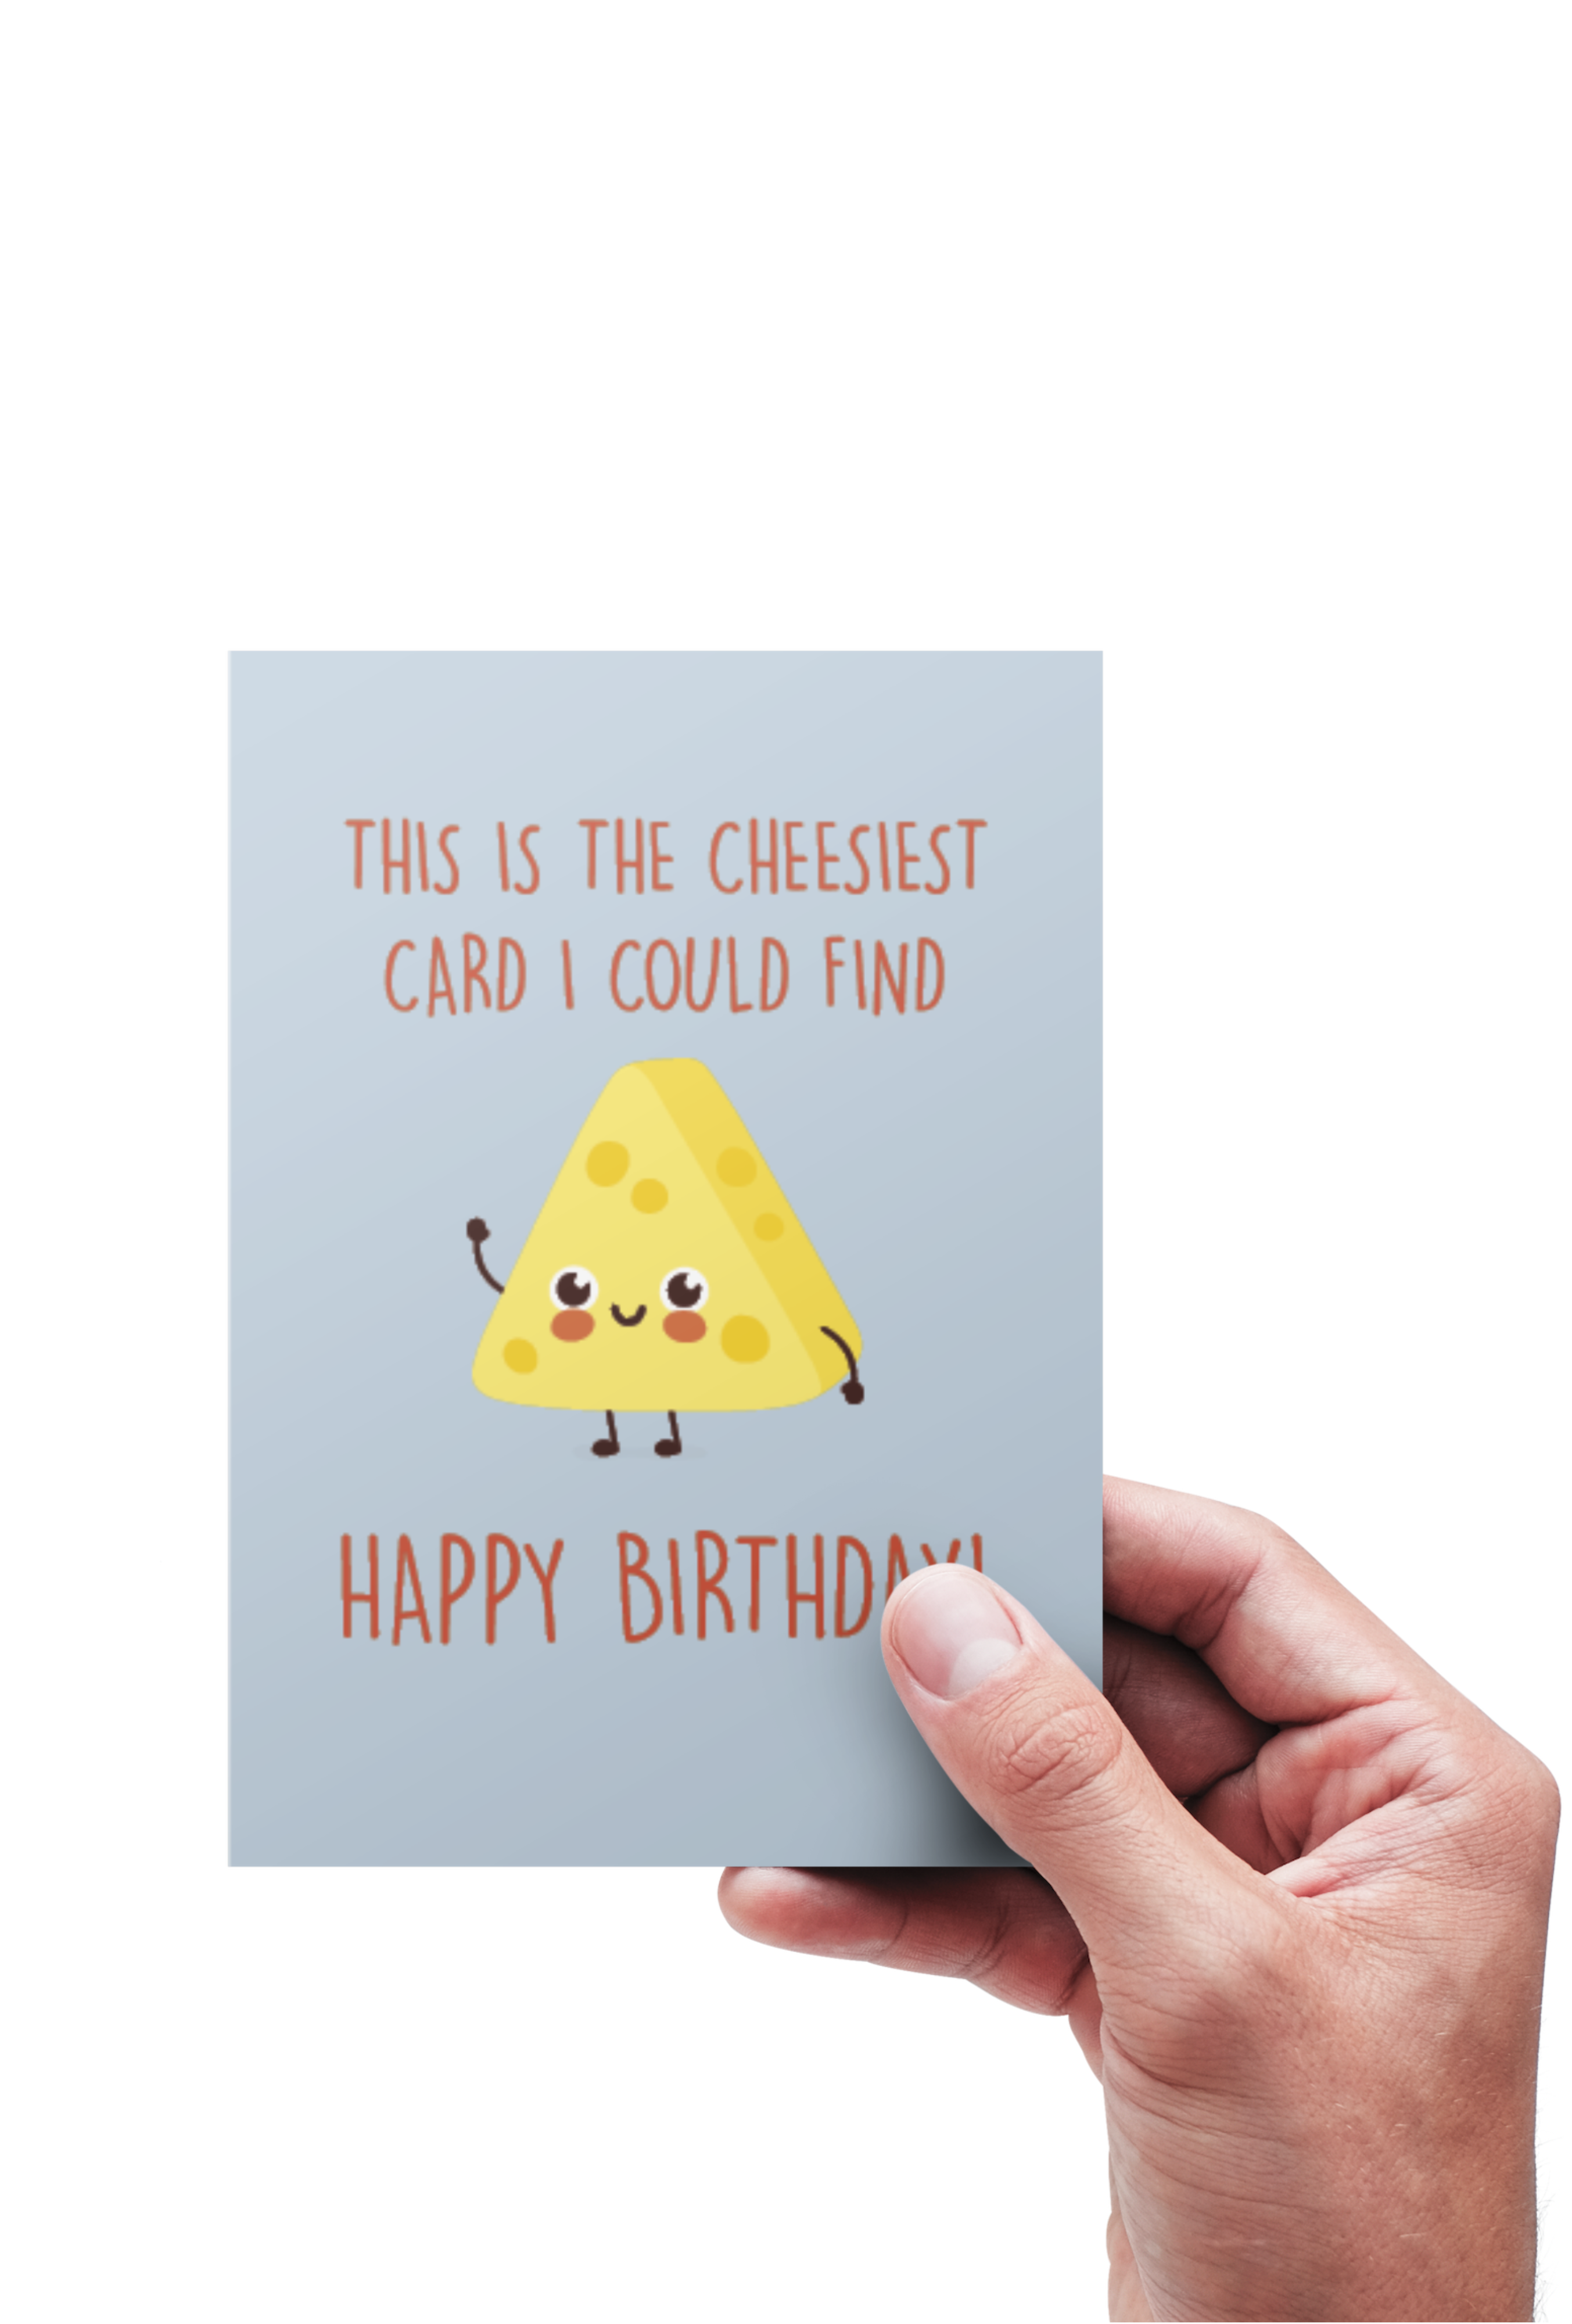 This is the cheesiest card I could find- Kort